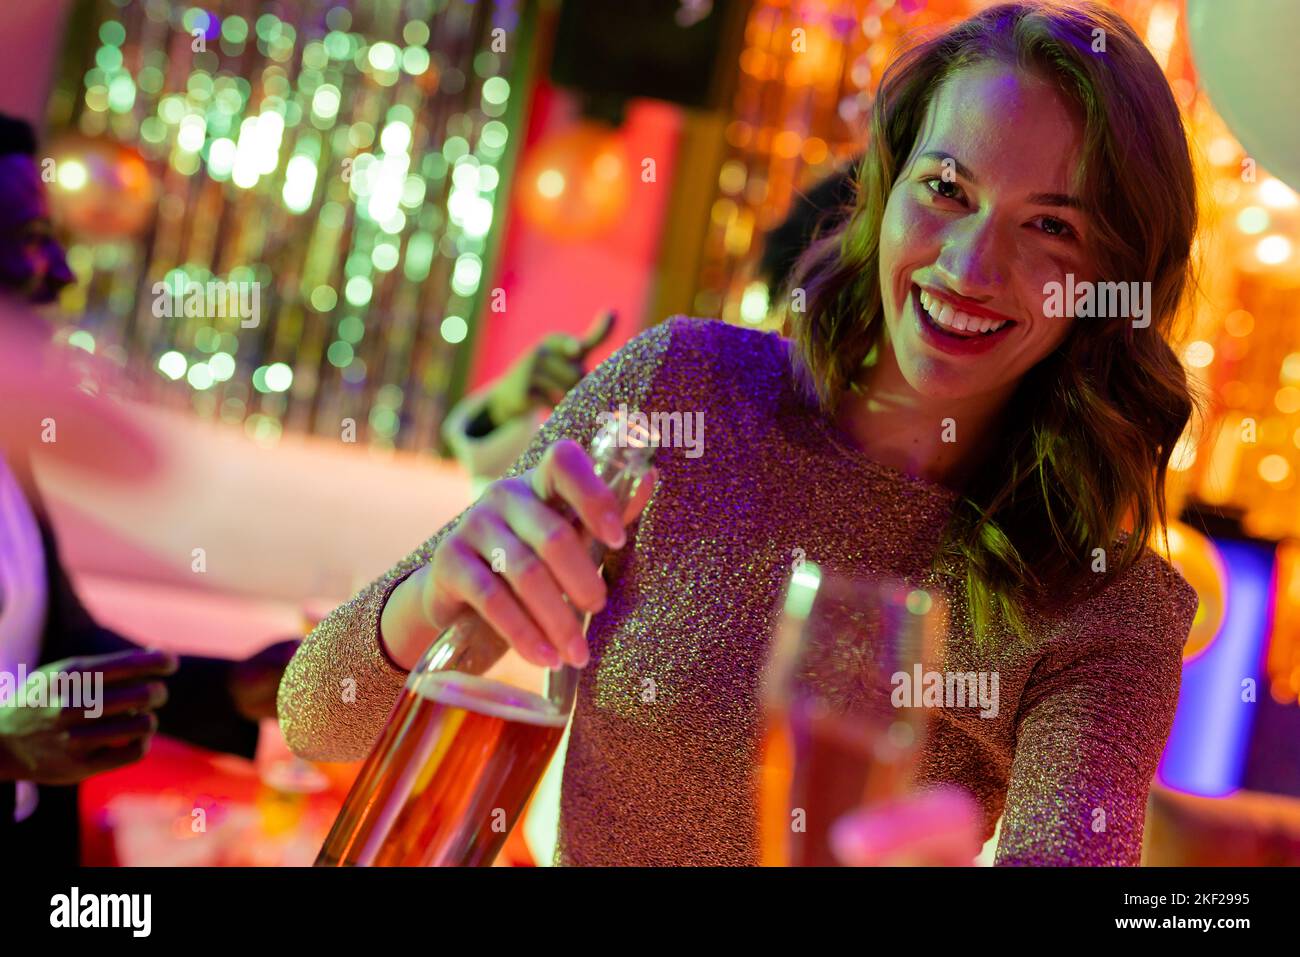 Smiling caucasian woman pouring glass of wine at nightclub. Fun, drinking, going out and party concept. Stock Photo